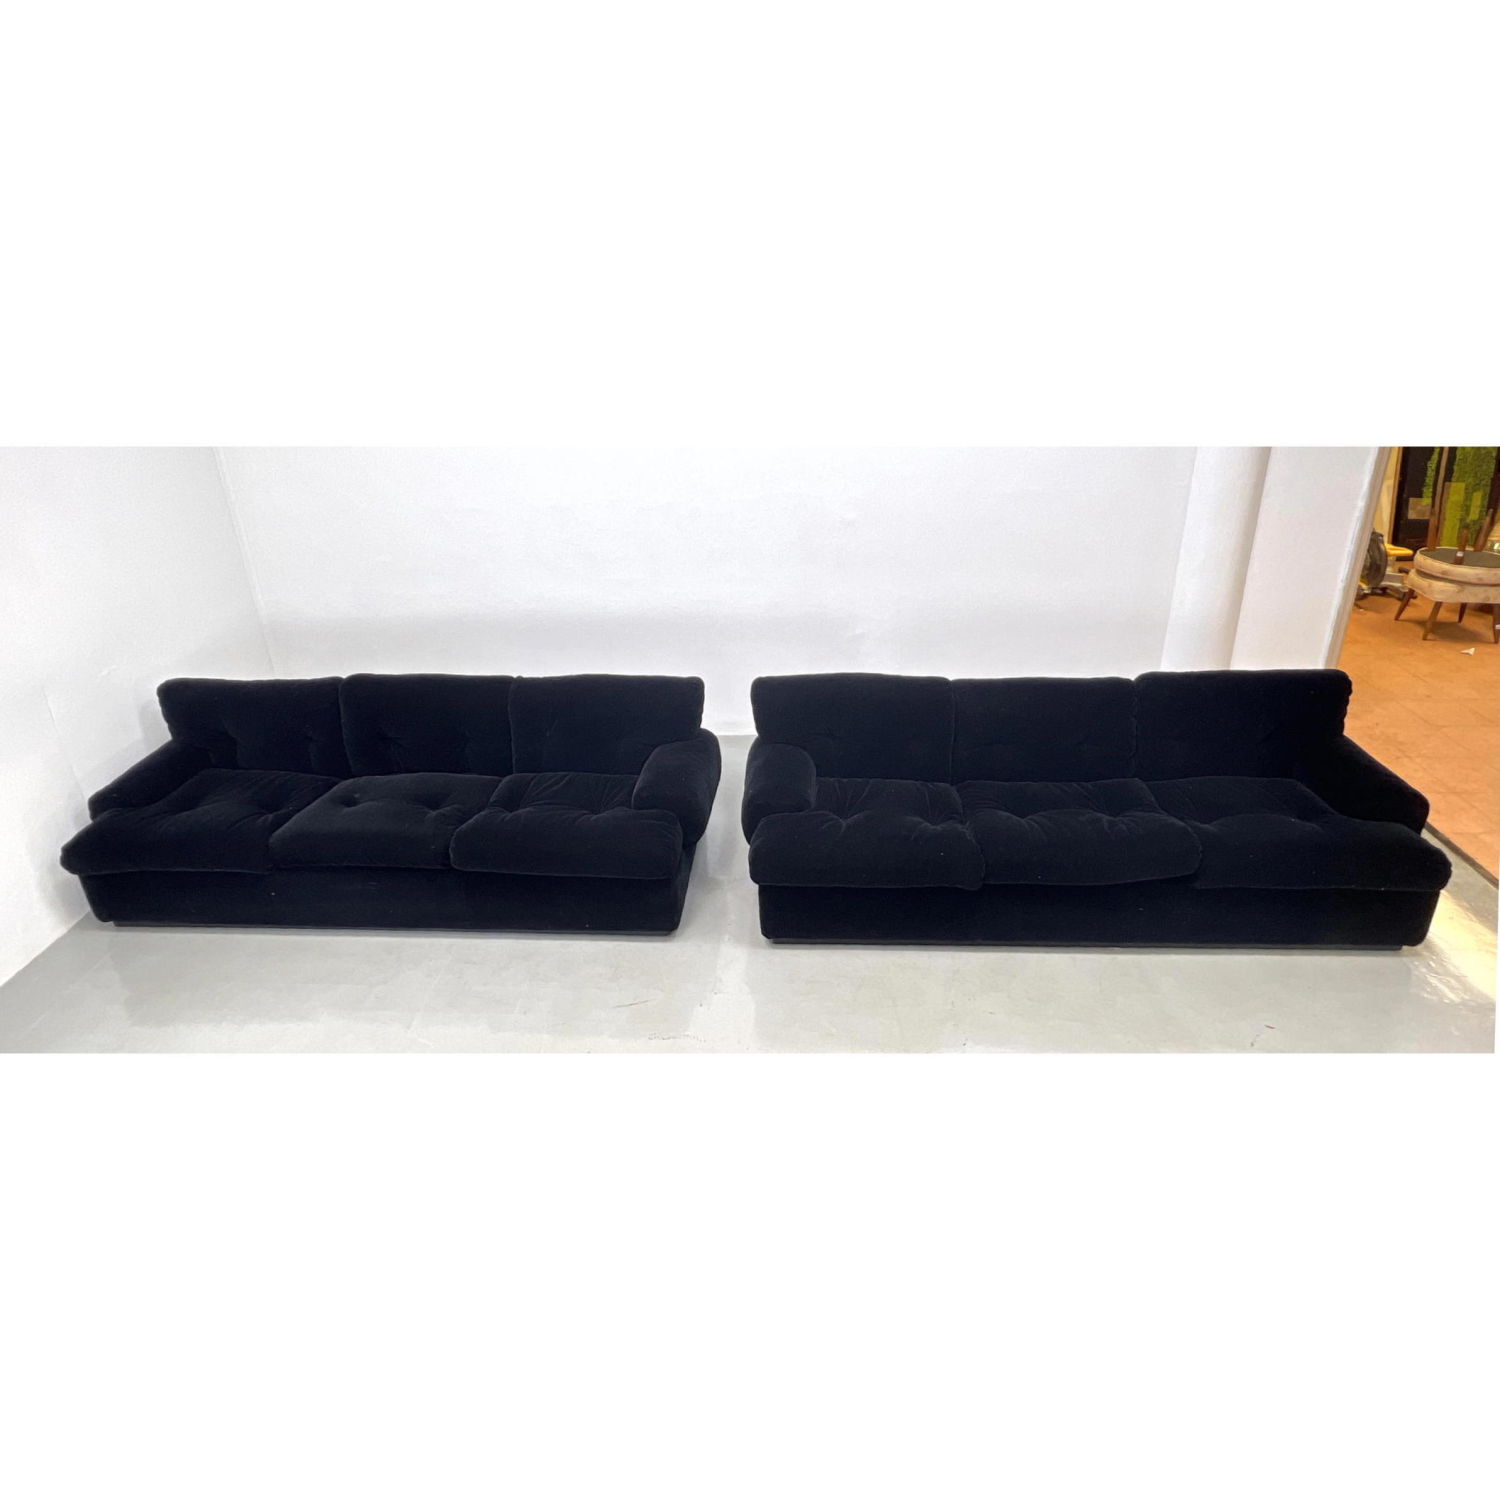 2pc Modernist PACE Sofa. Couches.